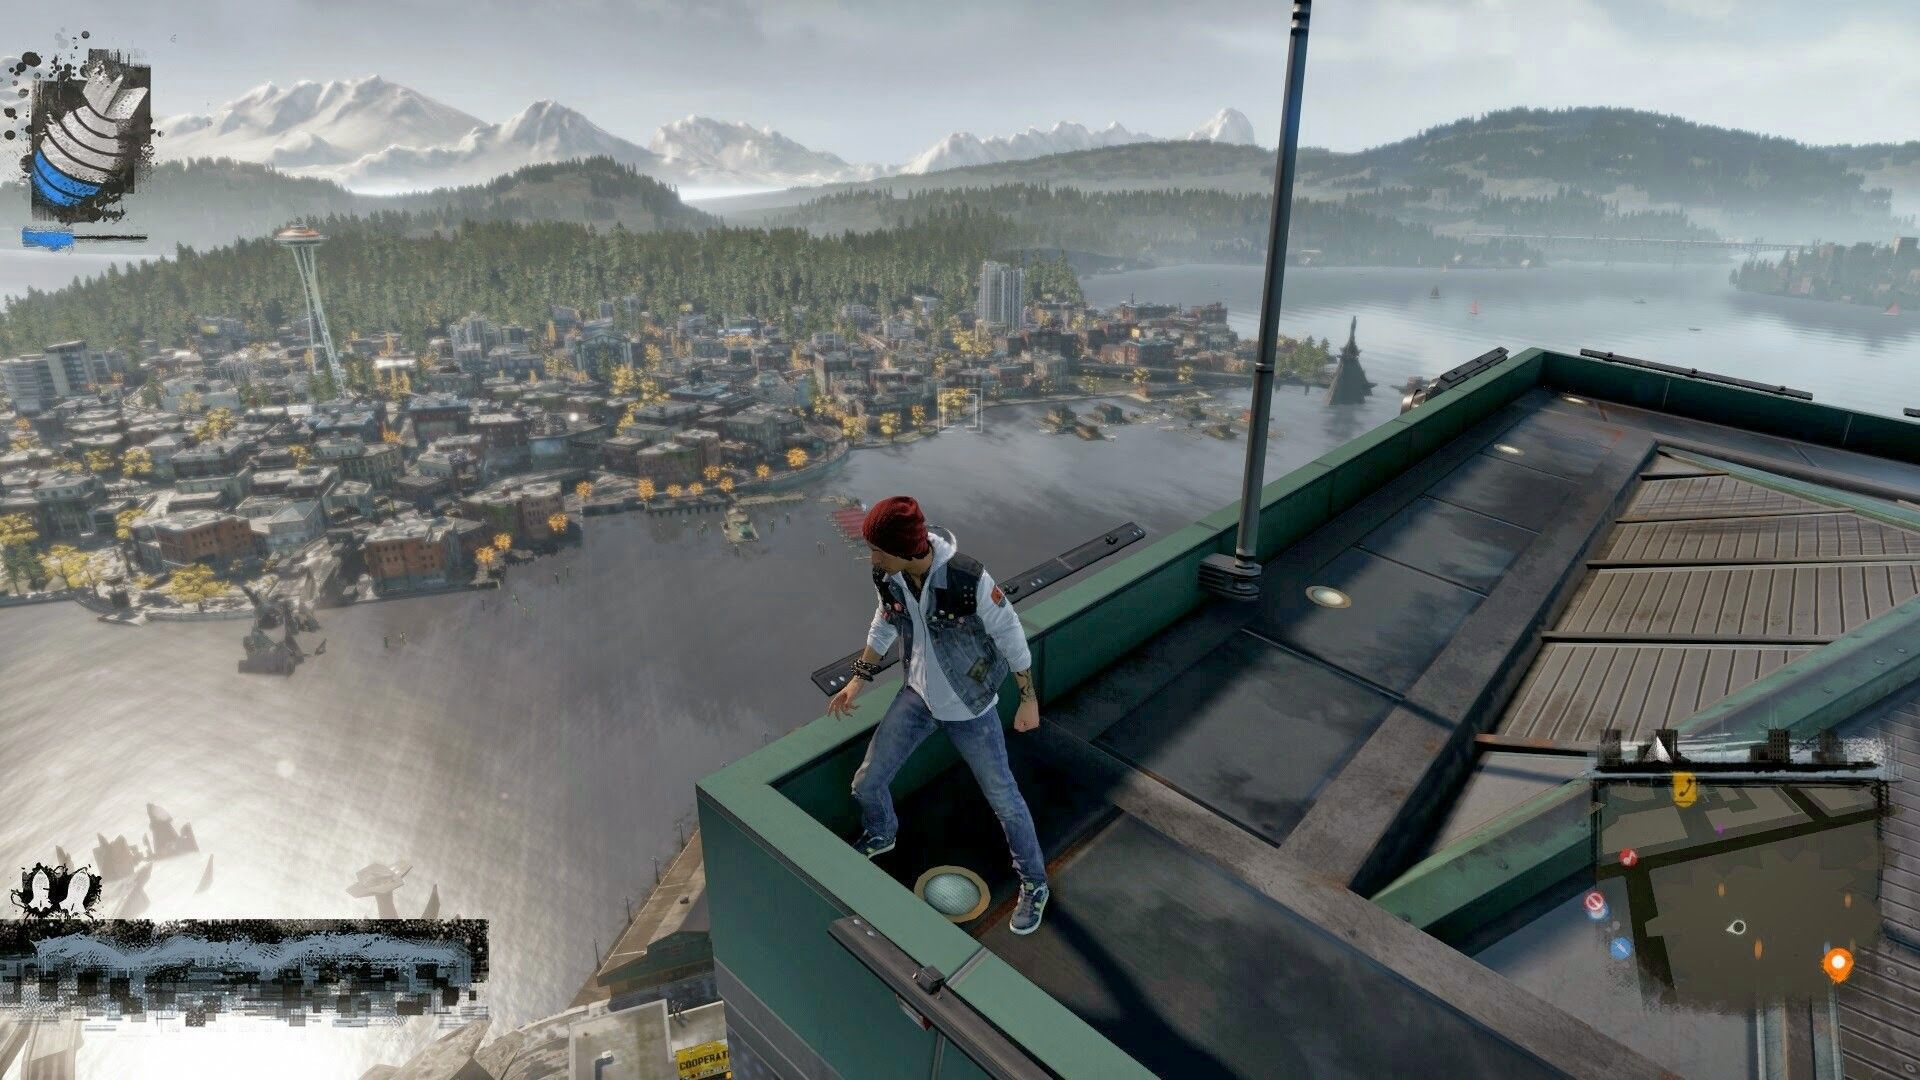 Second users. Infamous: second son. Infamous second son Map. Infamous second son карта. Infamous открытый мир.